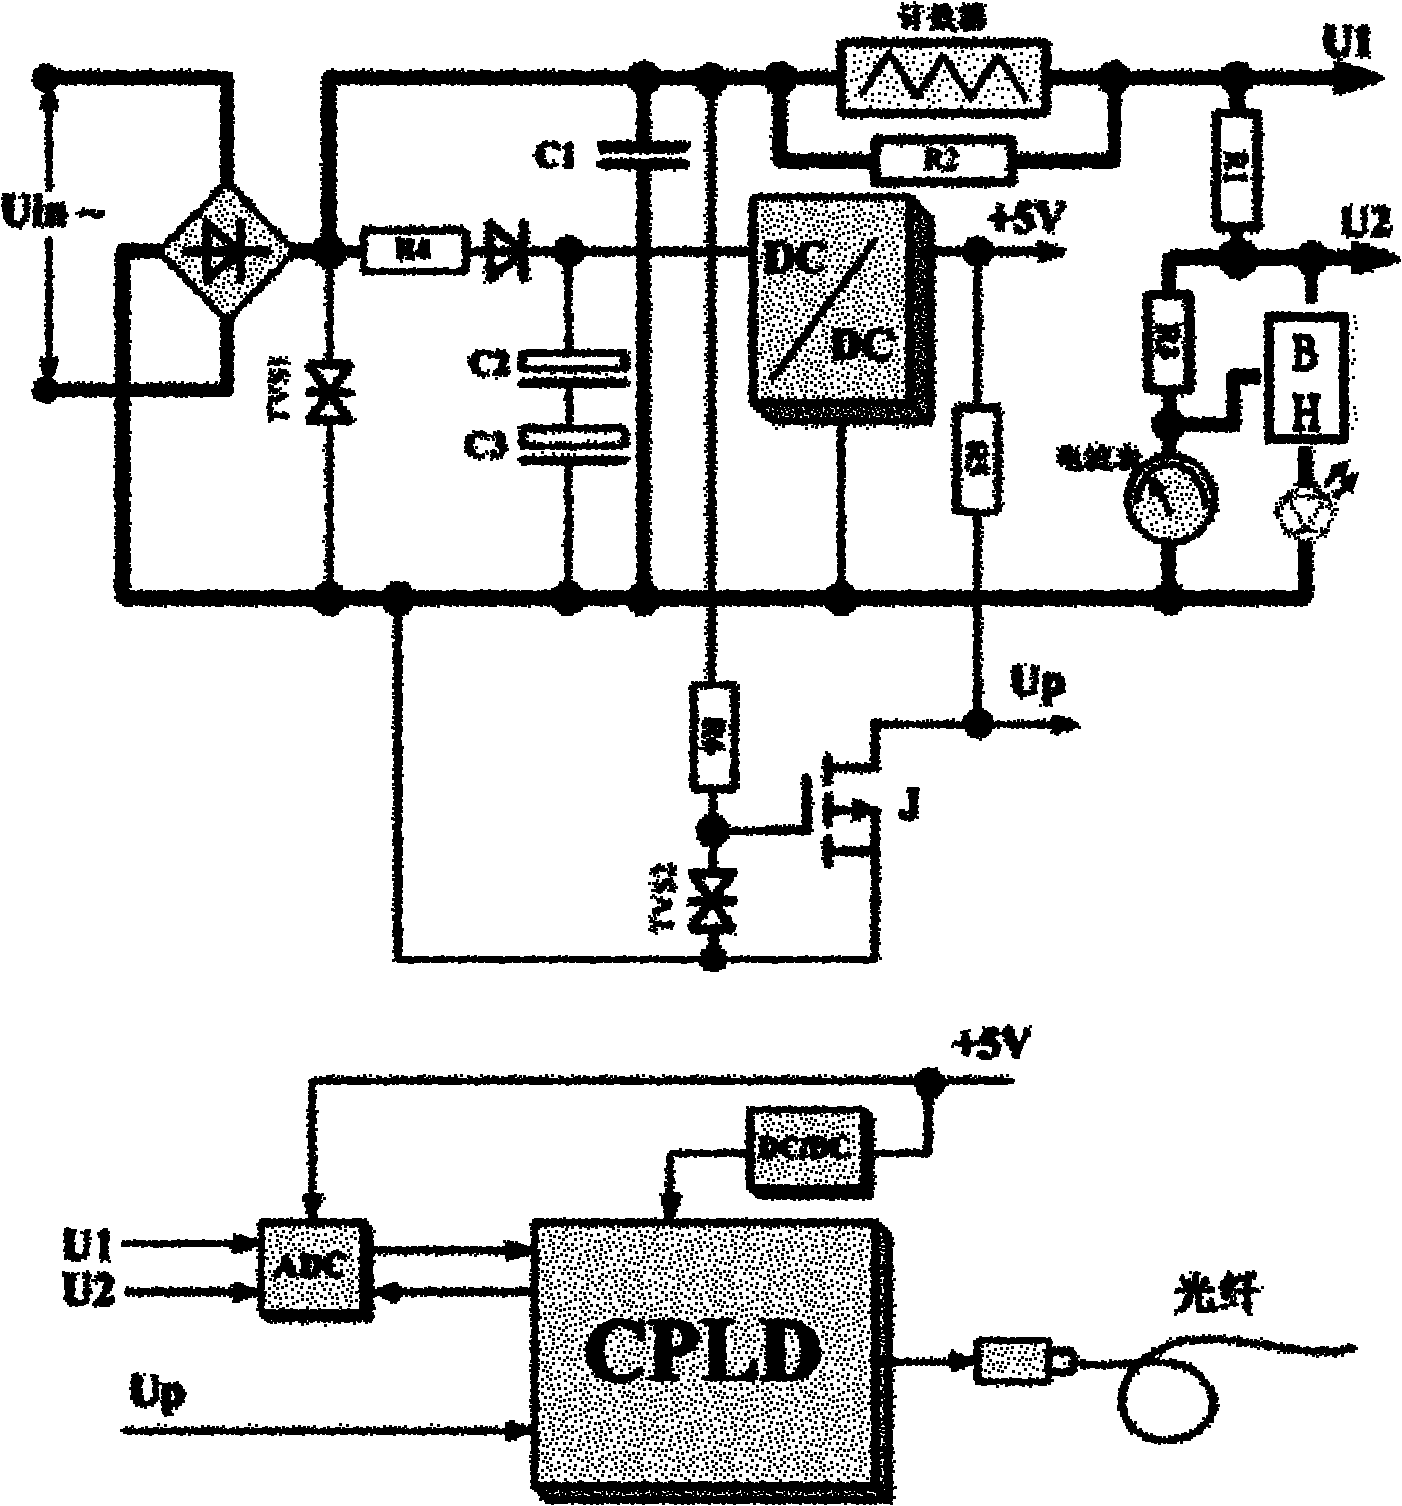 On-line arrester monitoring device with self-energy-taking function